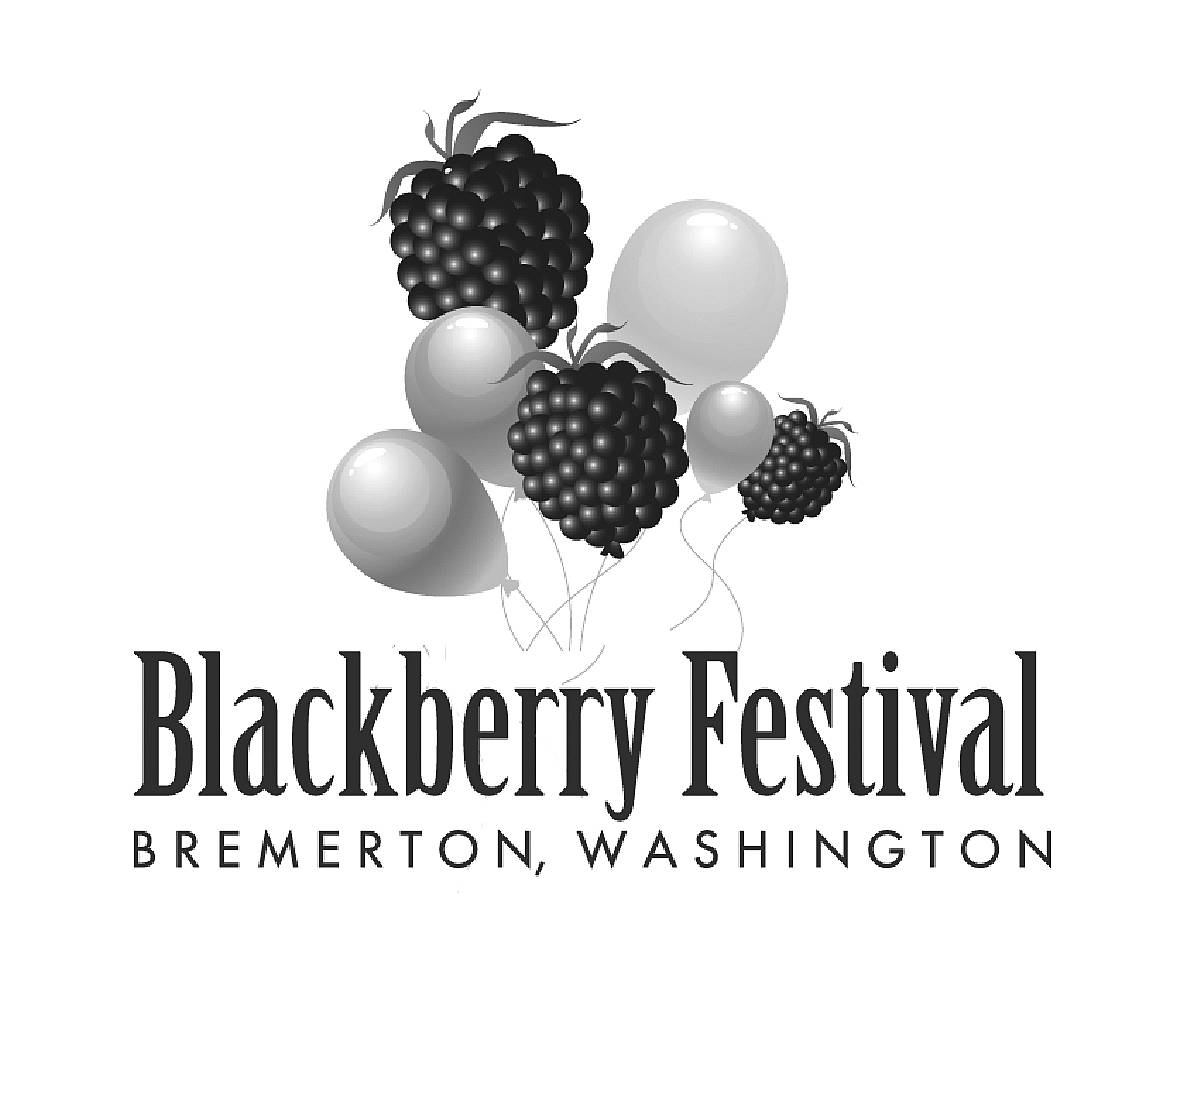 Here’s what’s to enjoy at the Blackberry Festival